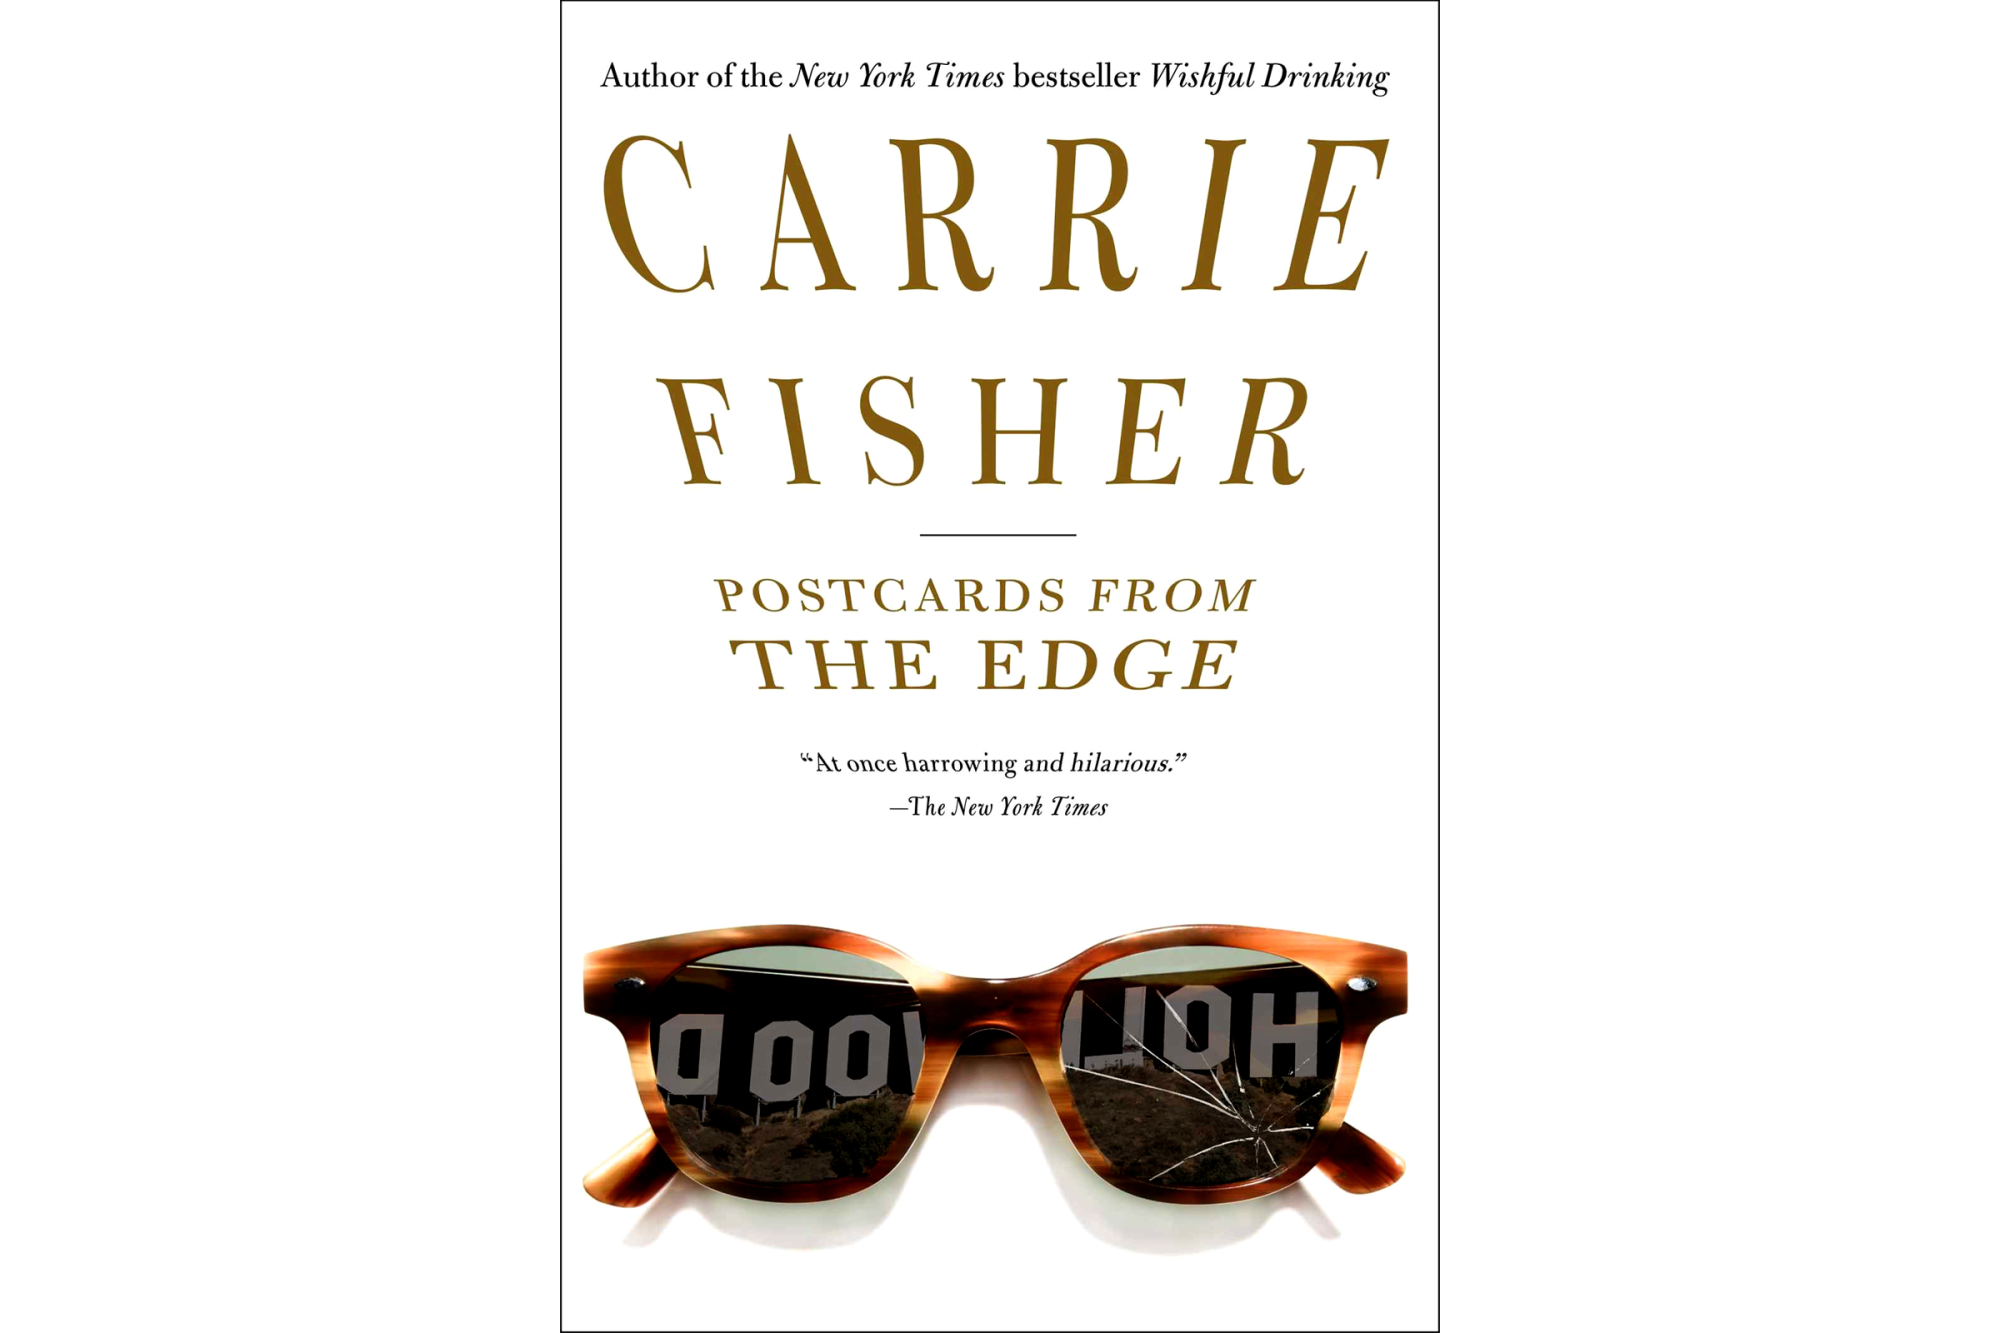 "Postcards from the Edge" by Carrie Fisher